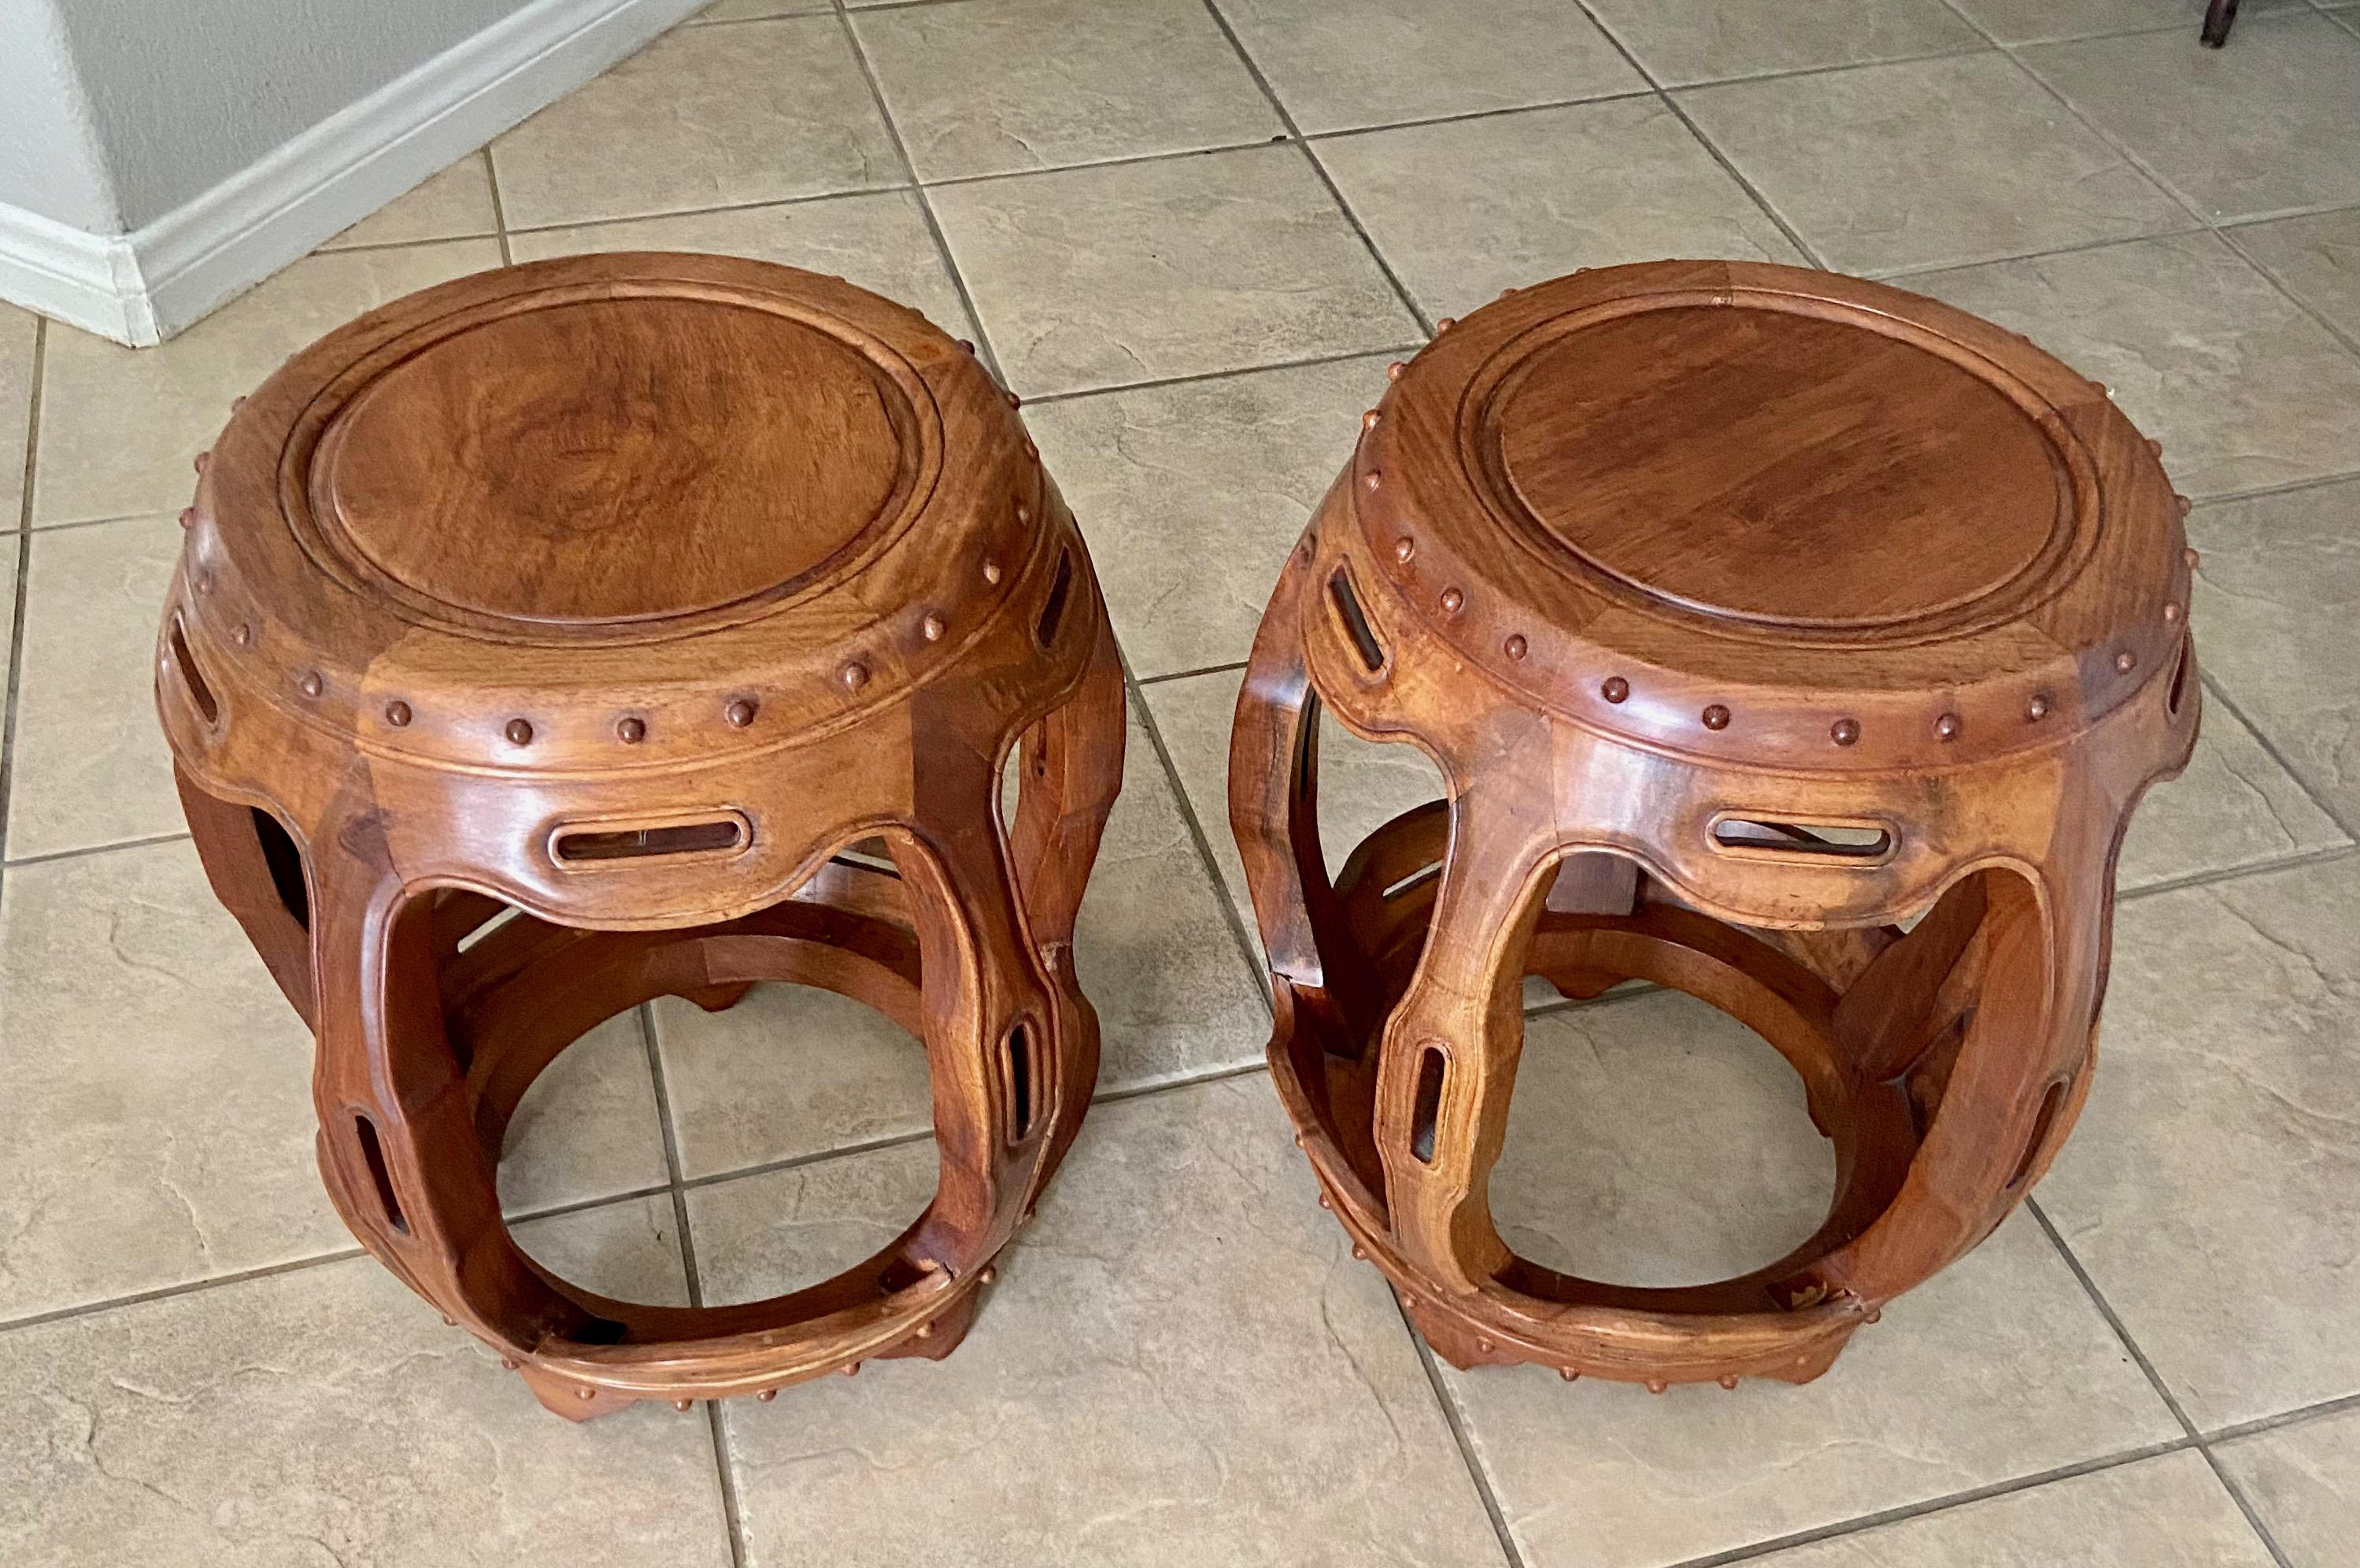 Wood Pair Late Qing Dynasty Chinese Hardwood Garden Seat Stools